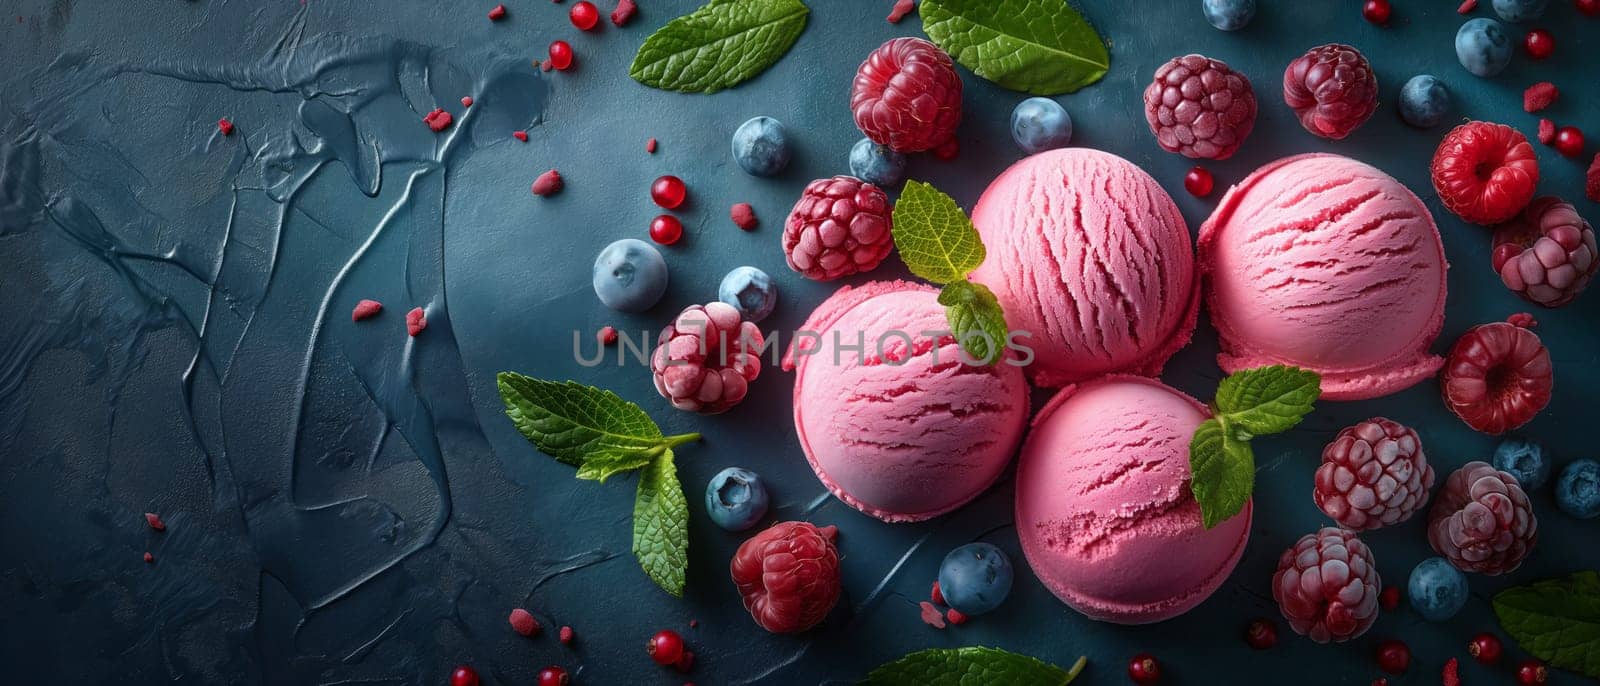 Ice cream with raspberries and blueberries. by Fischeron